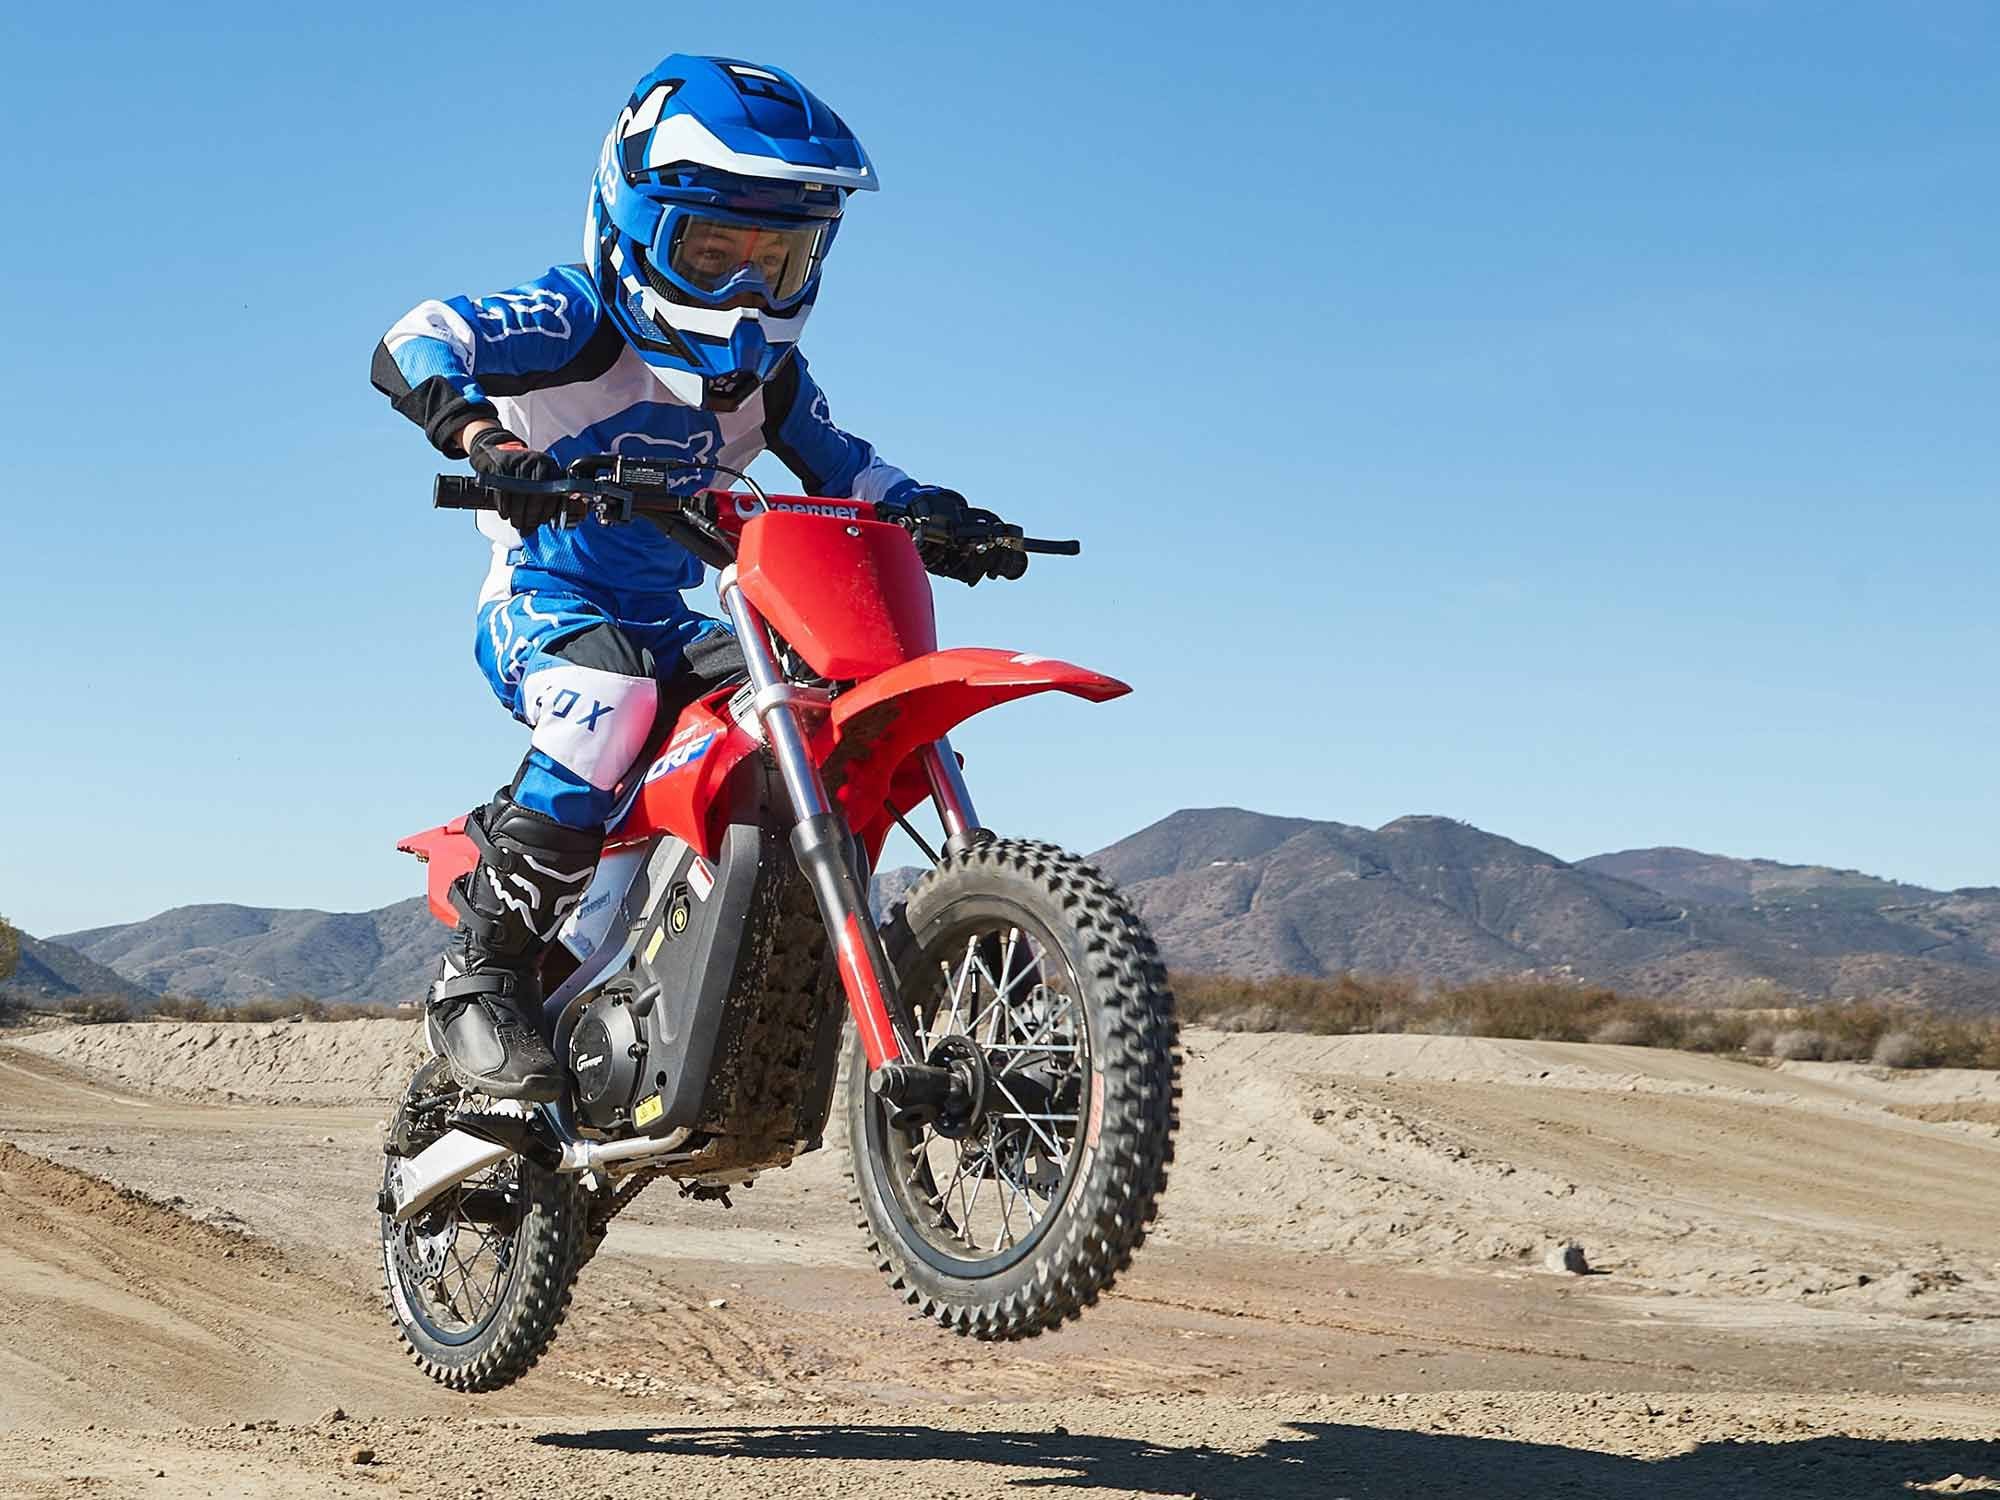 More serious than a toy bike, the new CRF-E2 is aimed at getting young riders out on the dirt with its easy operation and solid spec sheet.